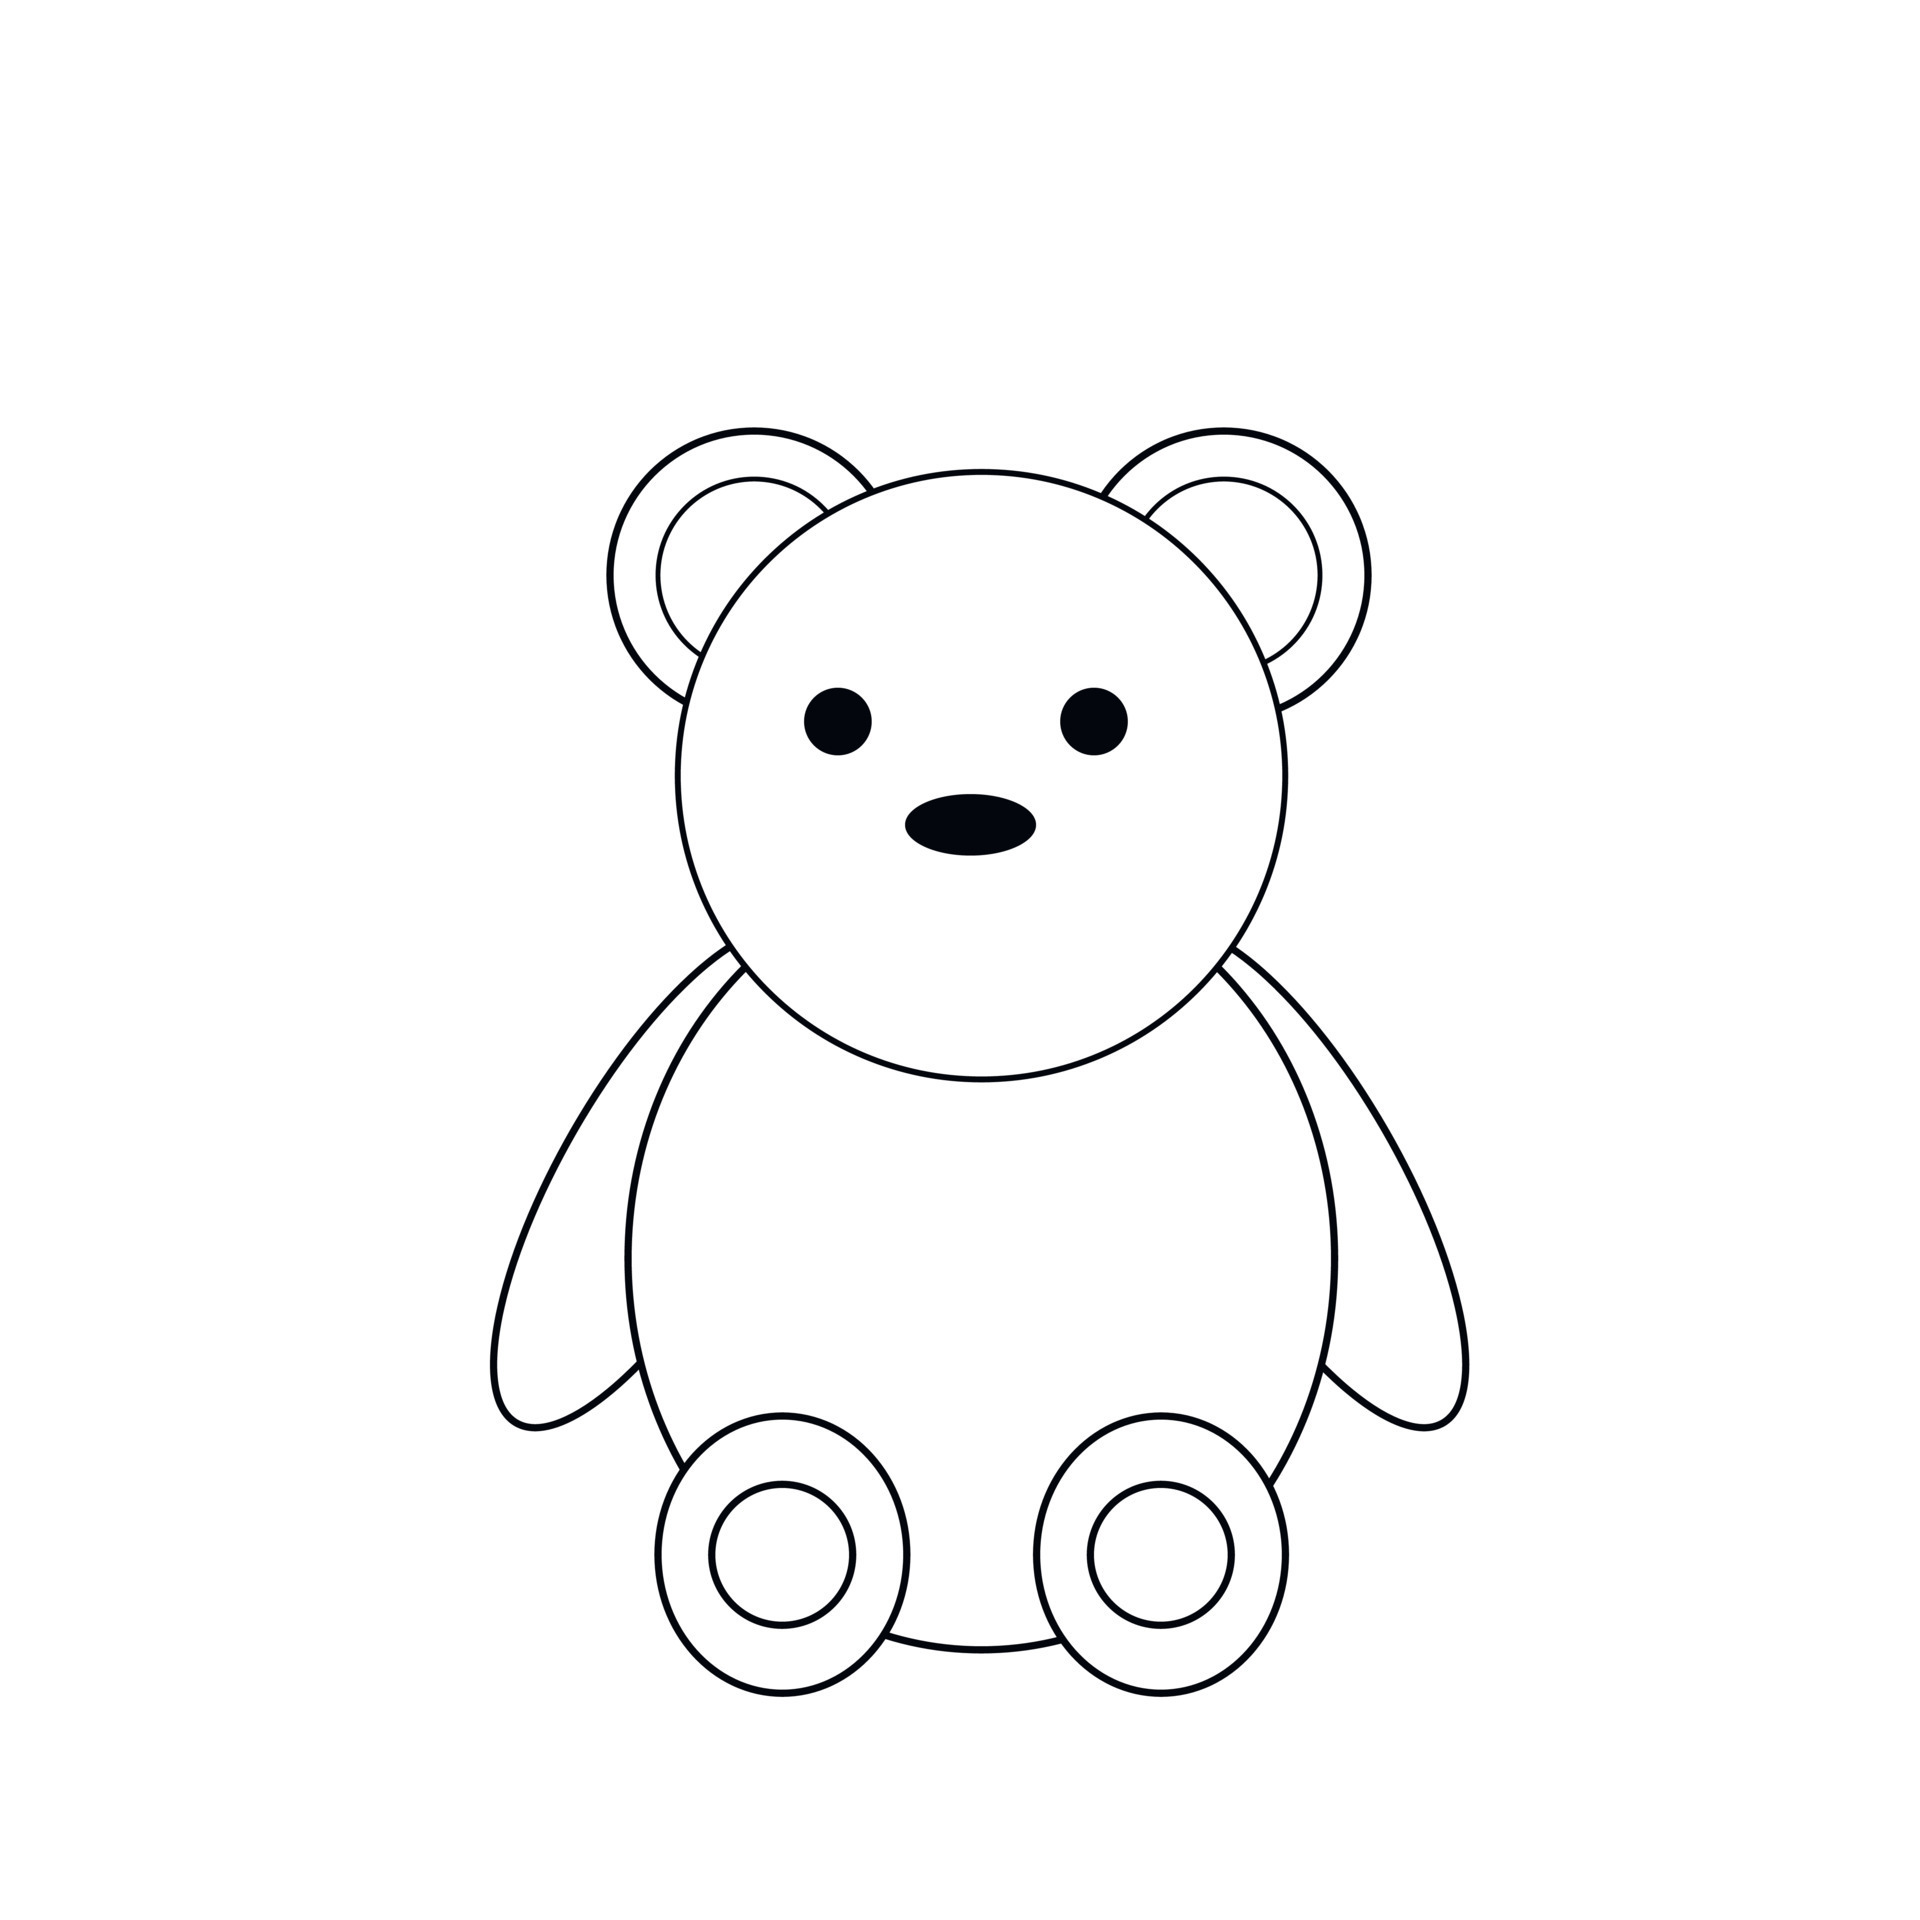 How to Draw an Easy Teddy Bear  Easy Drawing Tutorial For Kids